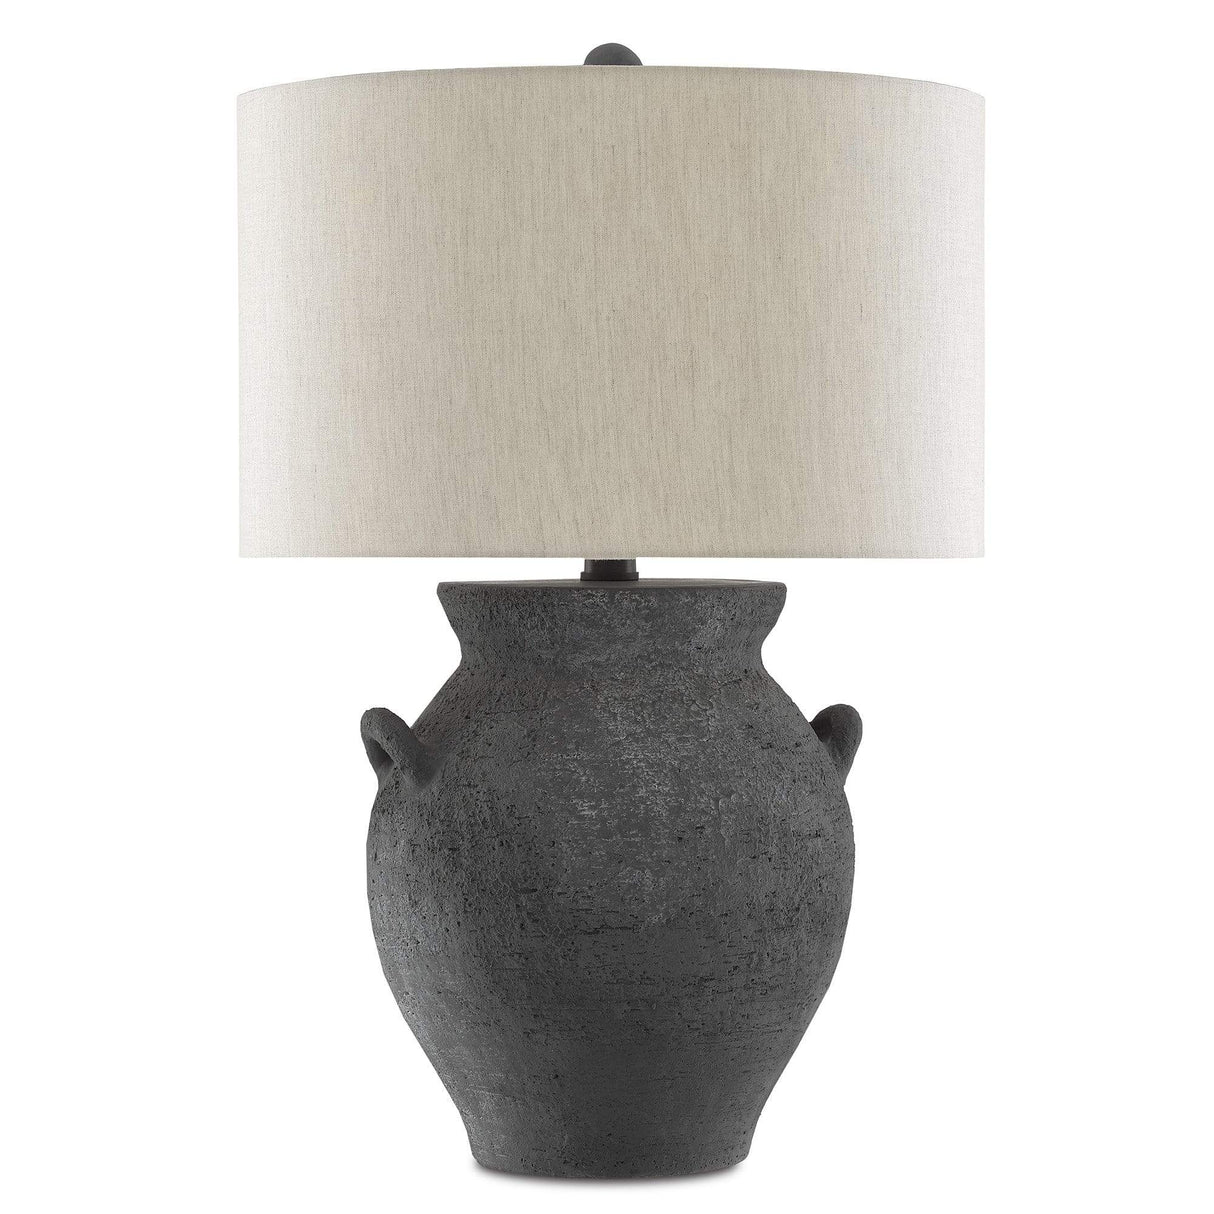 Currey and Company Anza Table Lamp Lighting currey-co-6000-0537